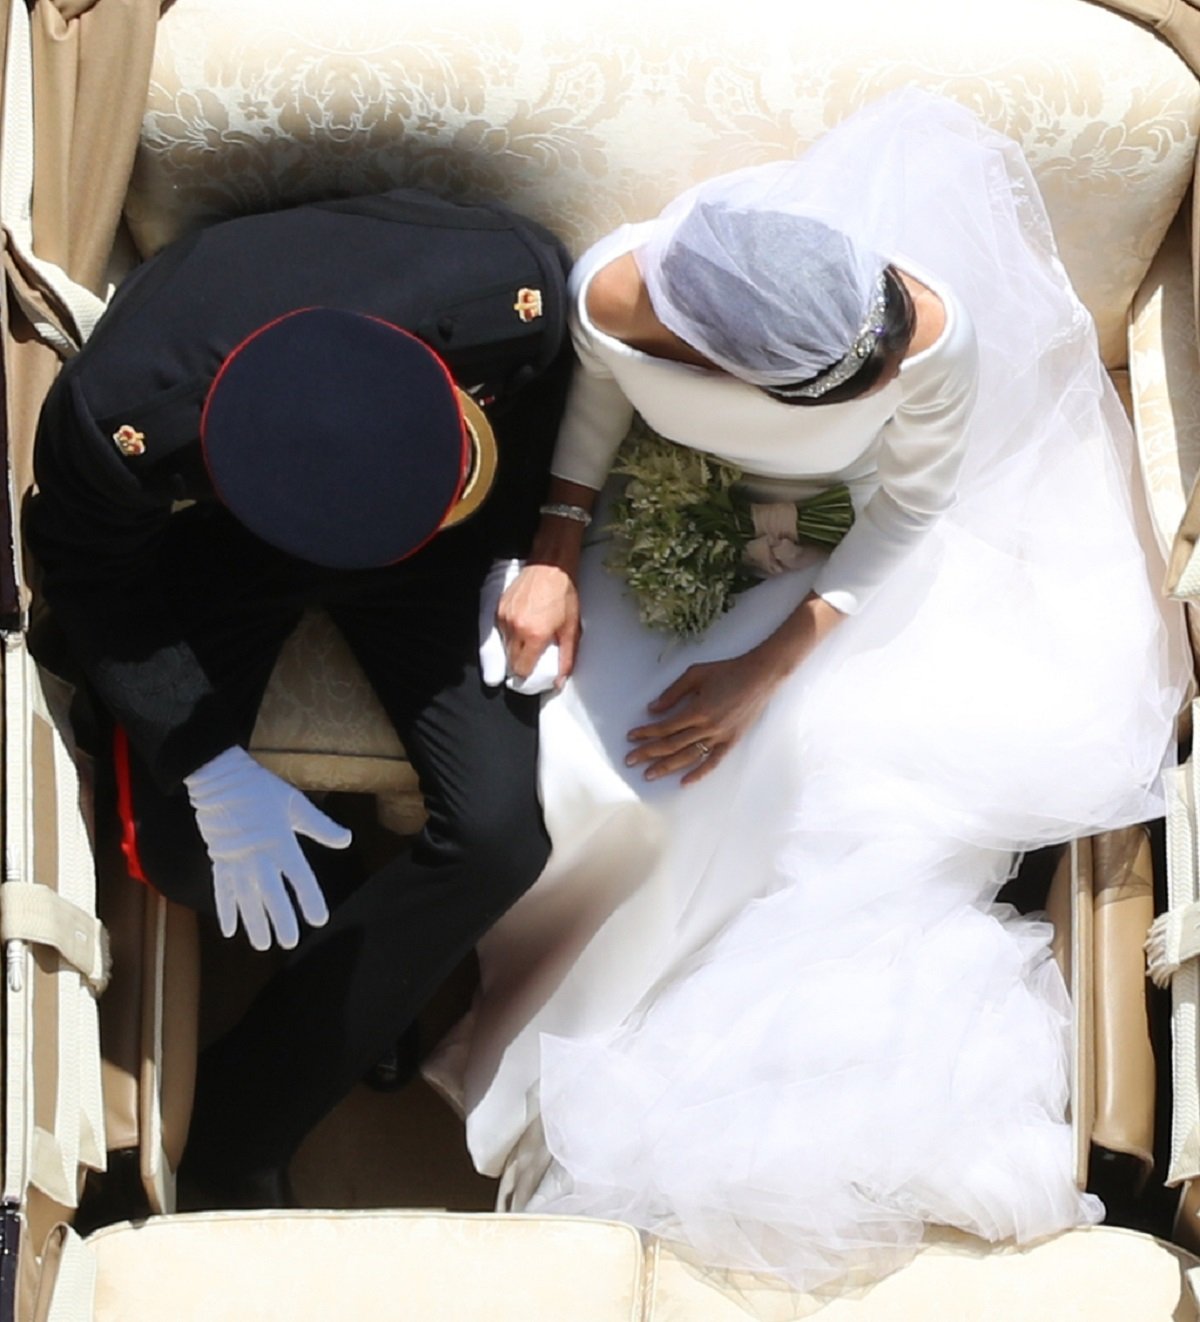 Bird's eye view of Meghan Markle and Prince Harry, who a body language expert analyzed demeanor in a wedding photo, holding hands in the Ascot Landau Carriage 